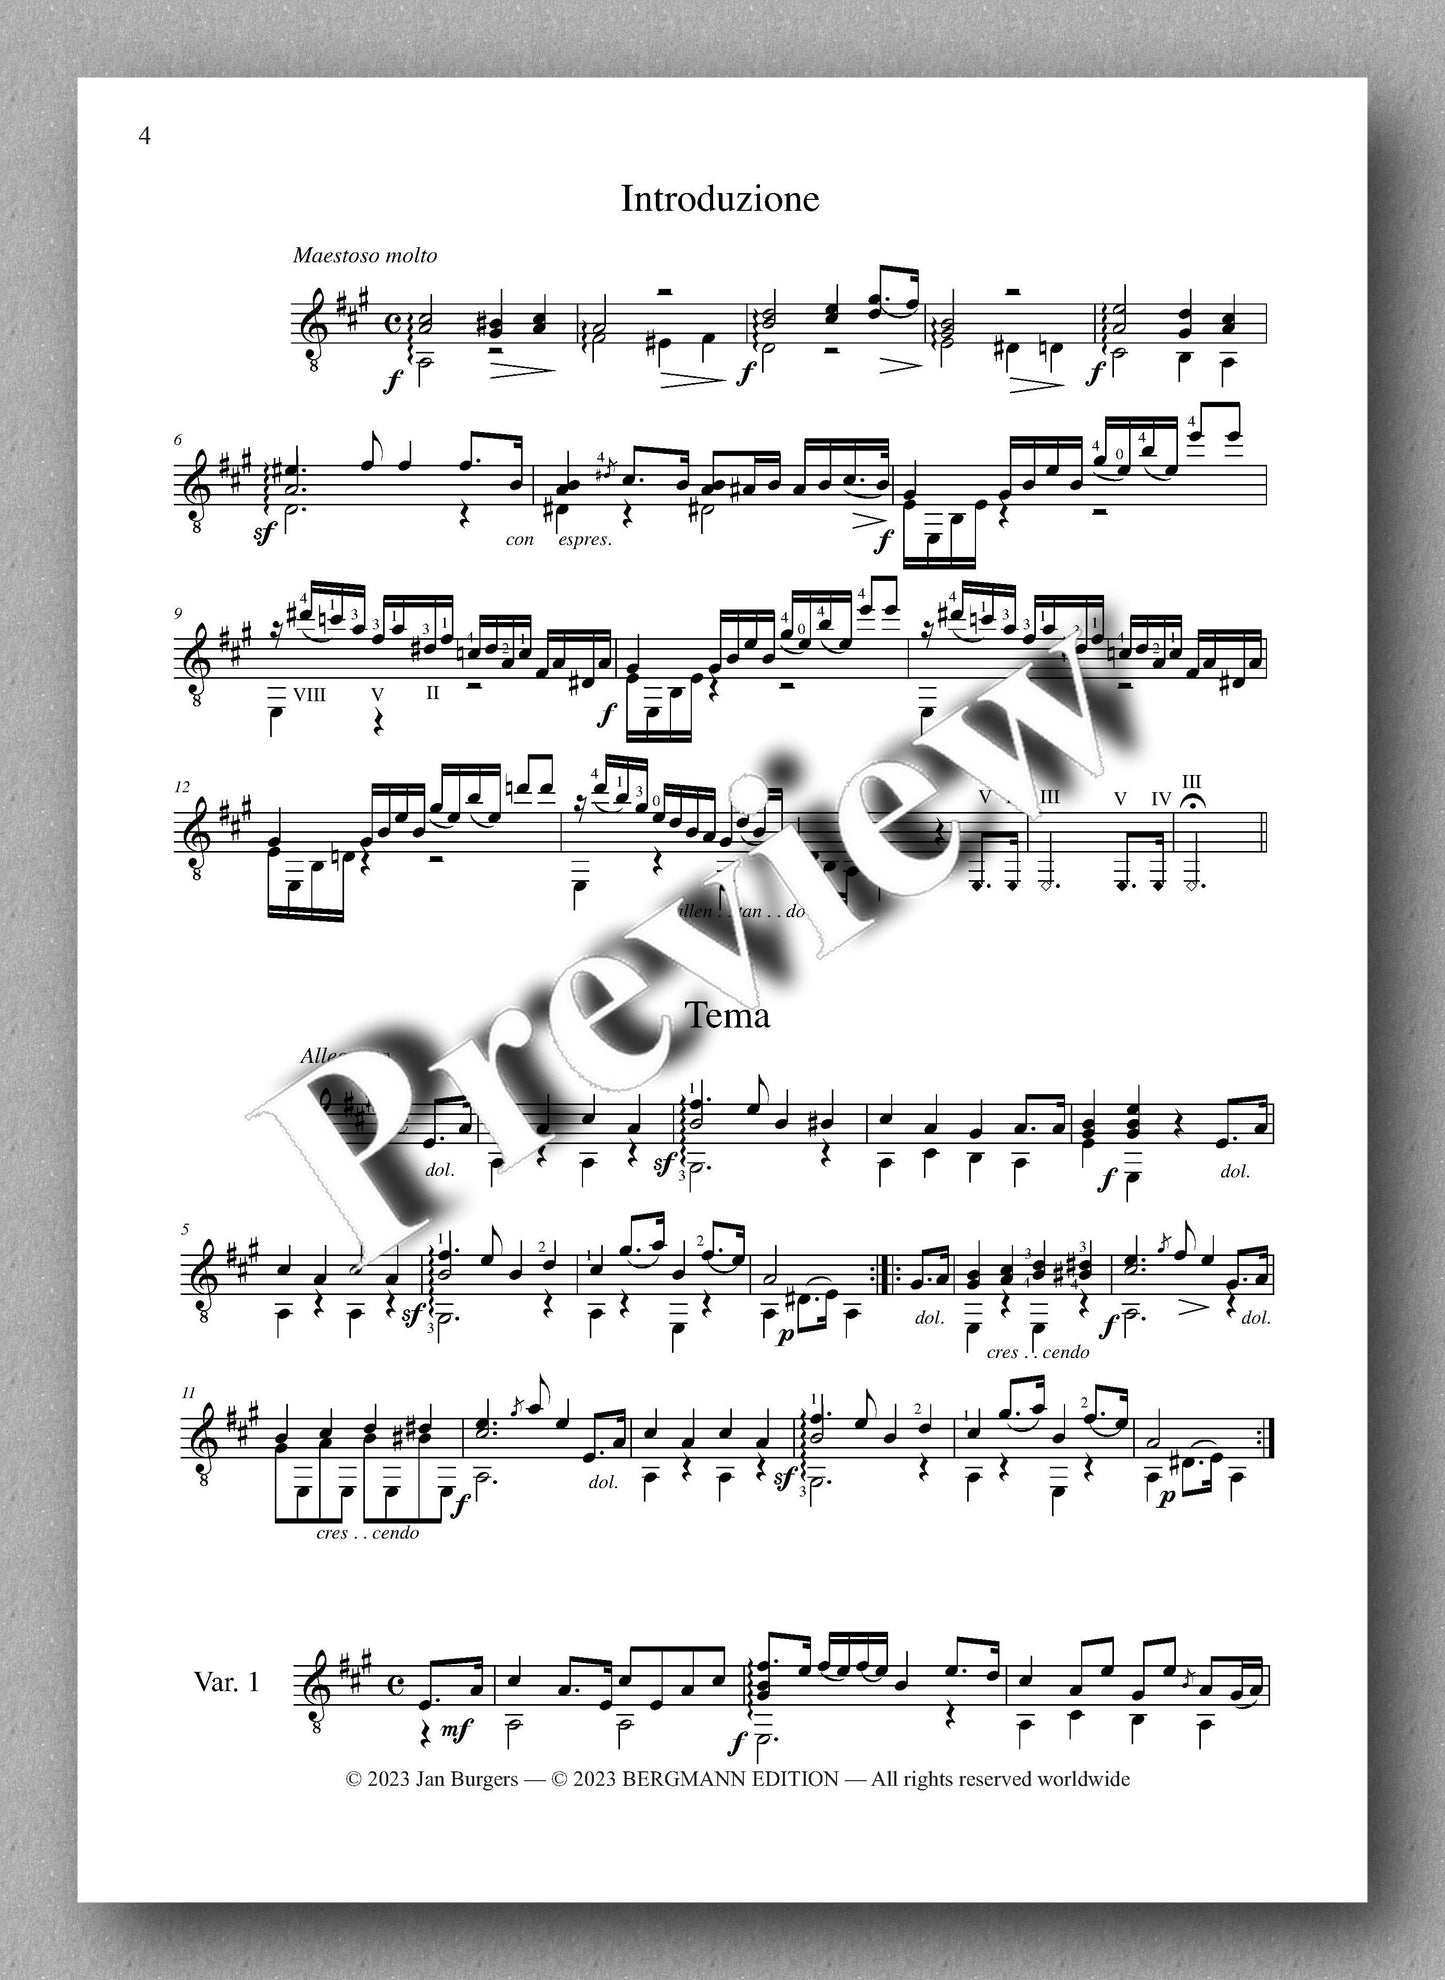 Molino, Collected Works for Guitar Solo, Vol. 35 - preview of the music score 1